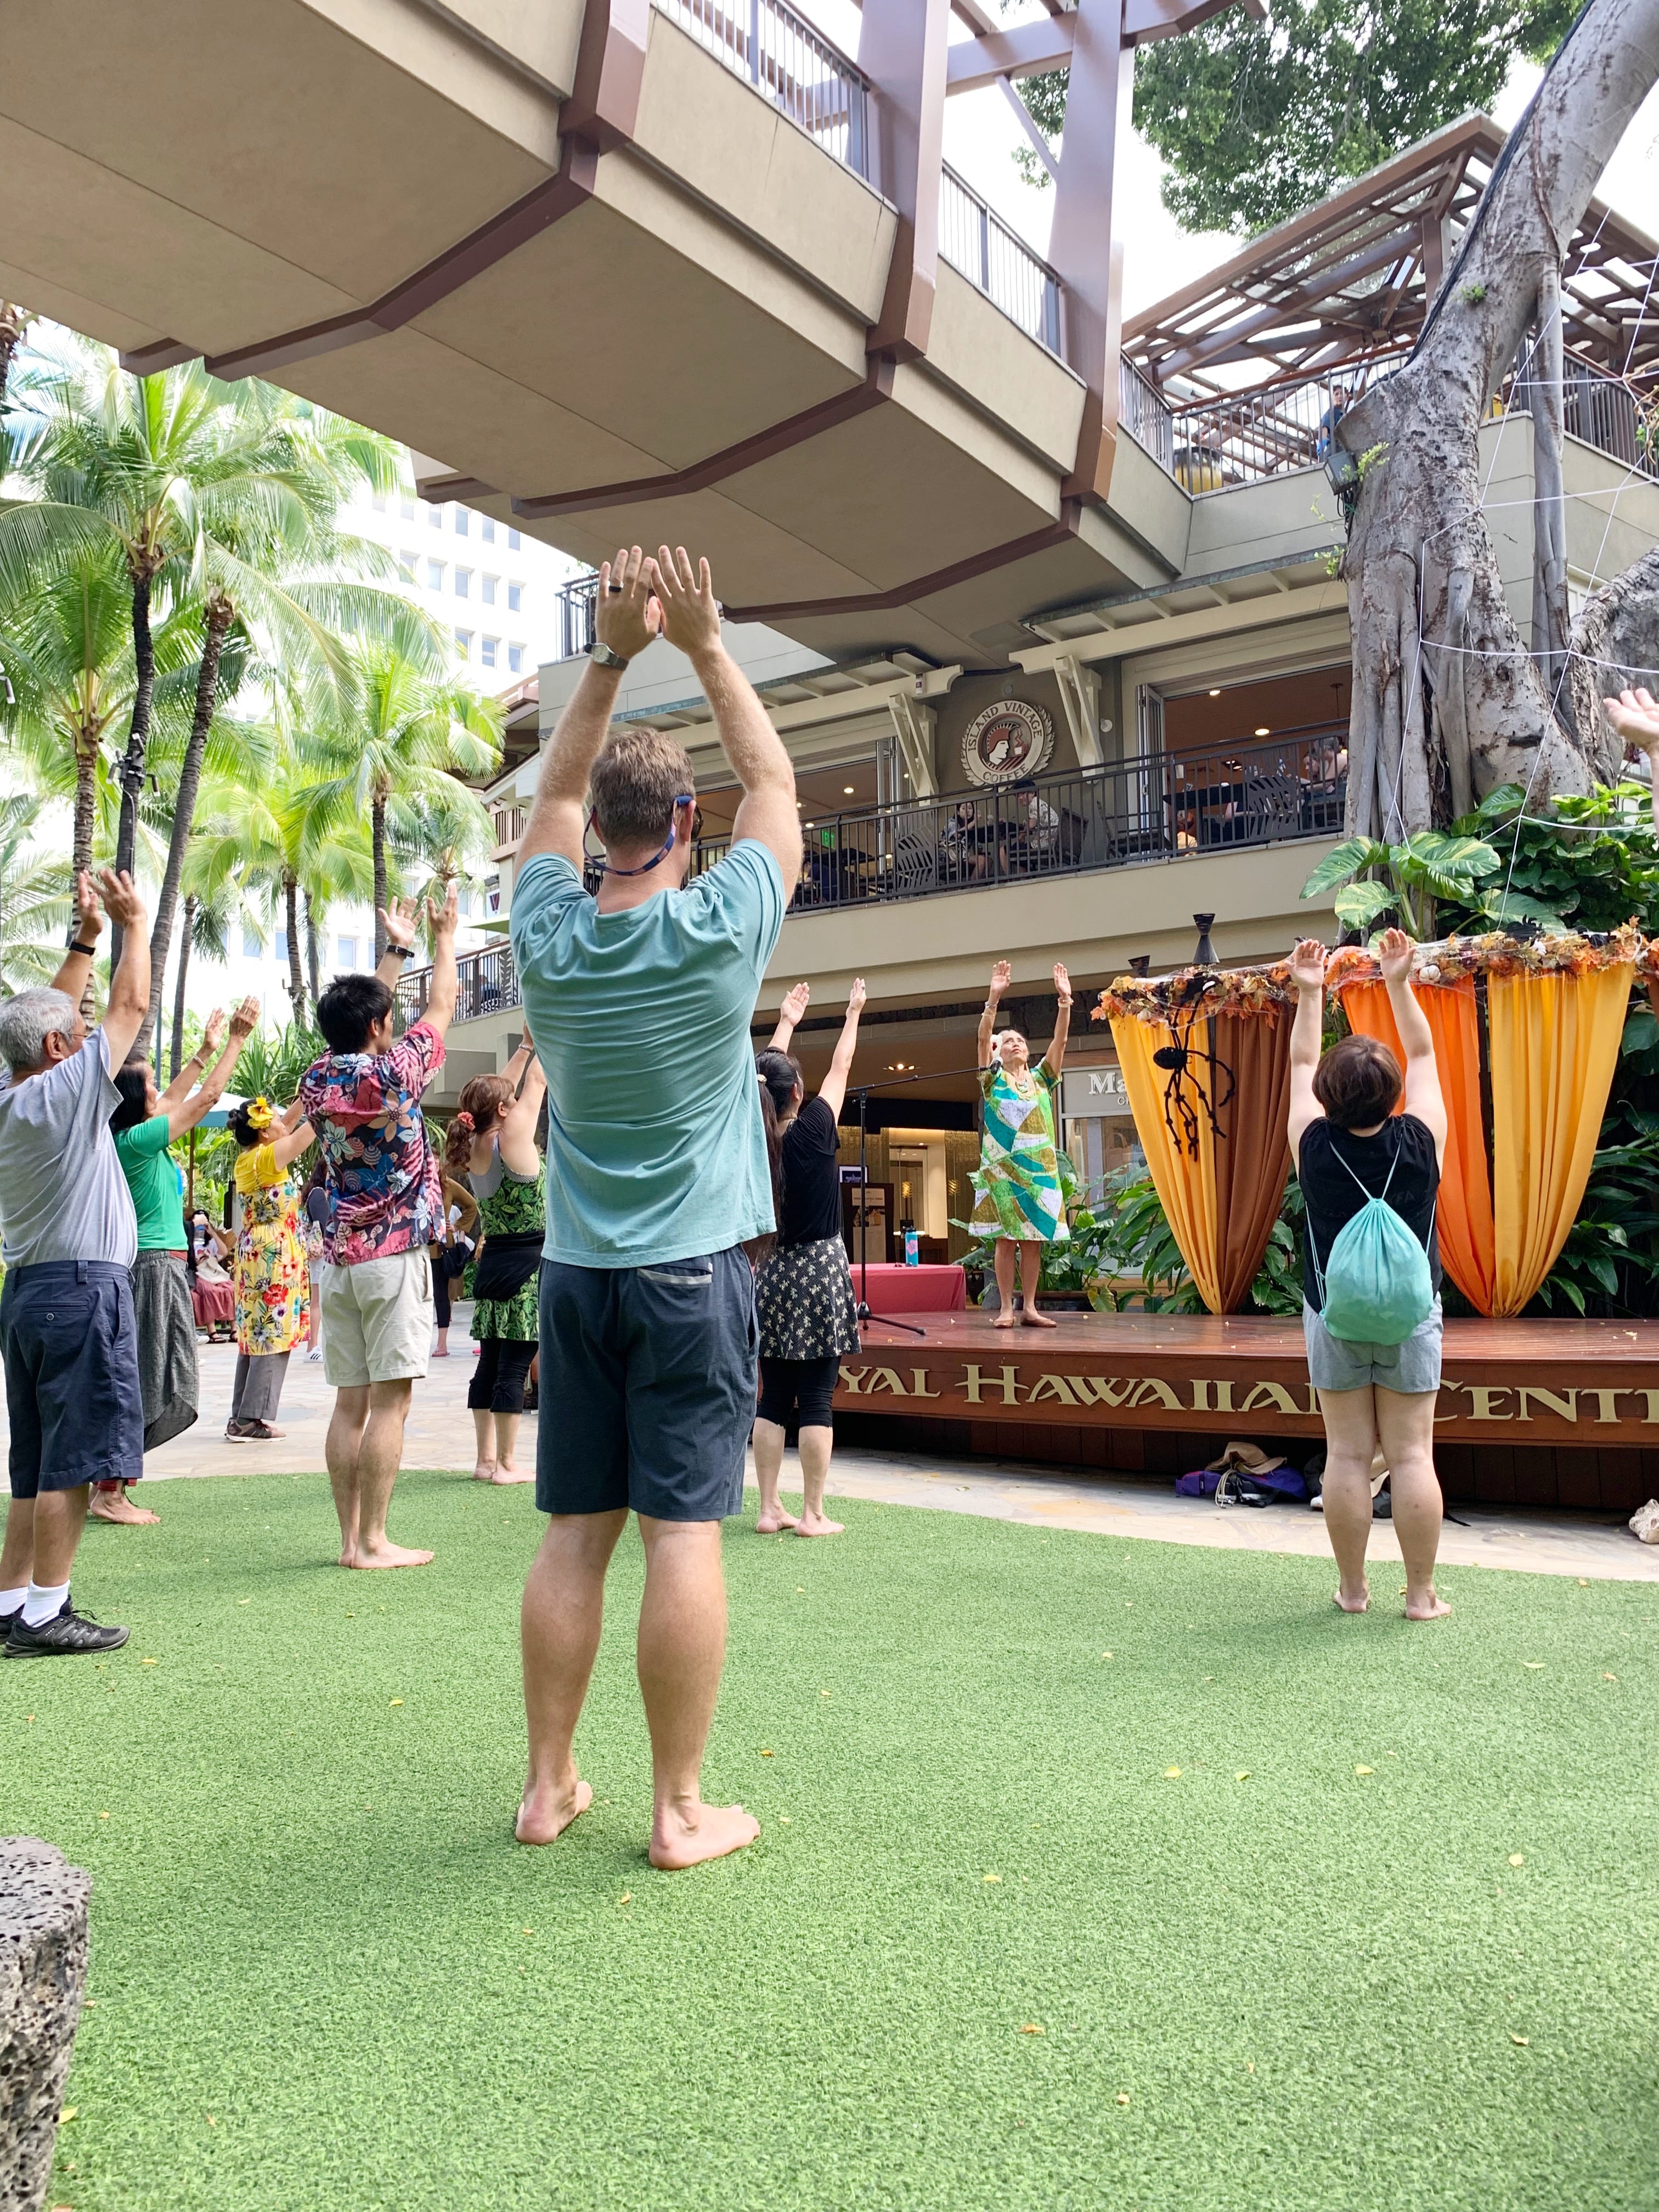 Free Hula Lessons At Royal Hawaiian Center - Looking for a fun and free activity in Honolulu? Check out the free hula lessons at Royal Hawaiian Center! | Royal Hawaiian Center Oahu - Royal Hawaiian Shopping center - Oahu Hawaii Activities